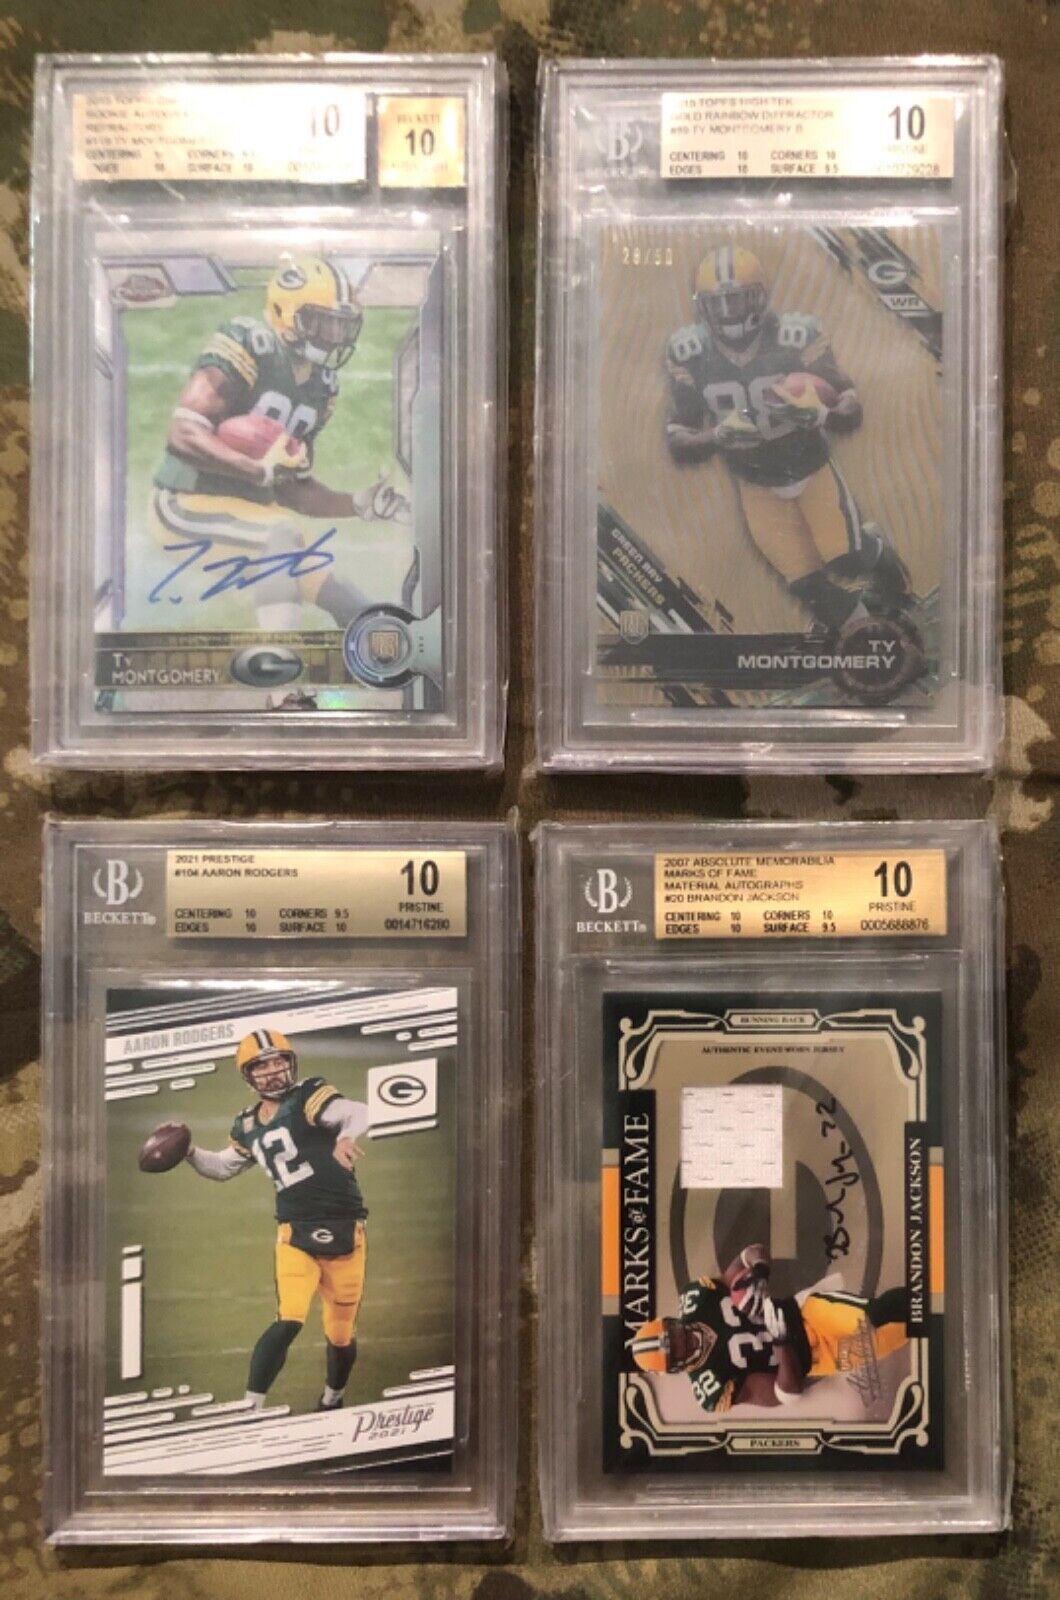 LOT of 4 BGS 10 PRISTINE GREEN BAY PACKER AARON RODGERS & GOLD AUTOGRAPHS & MORE